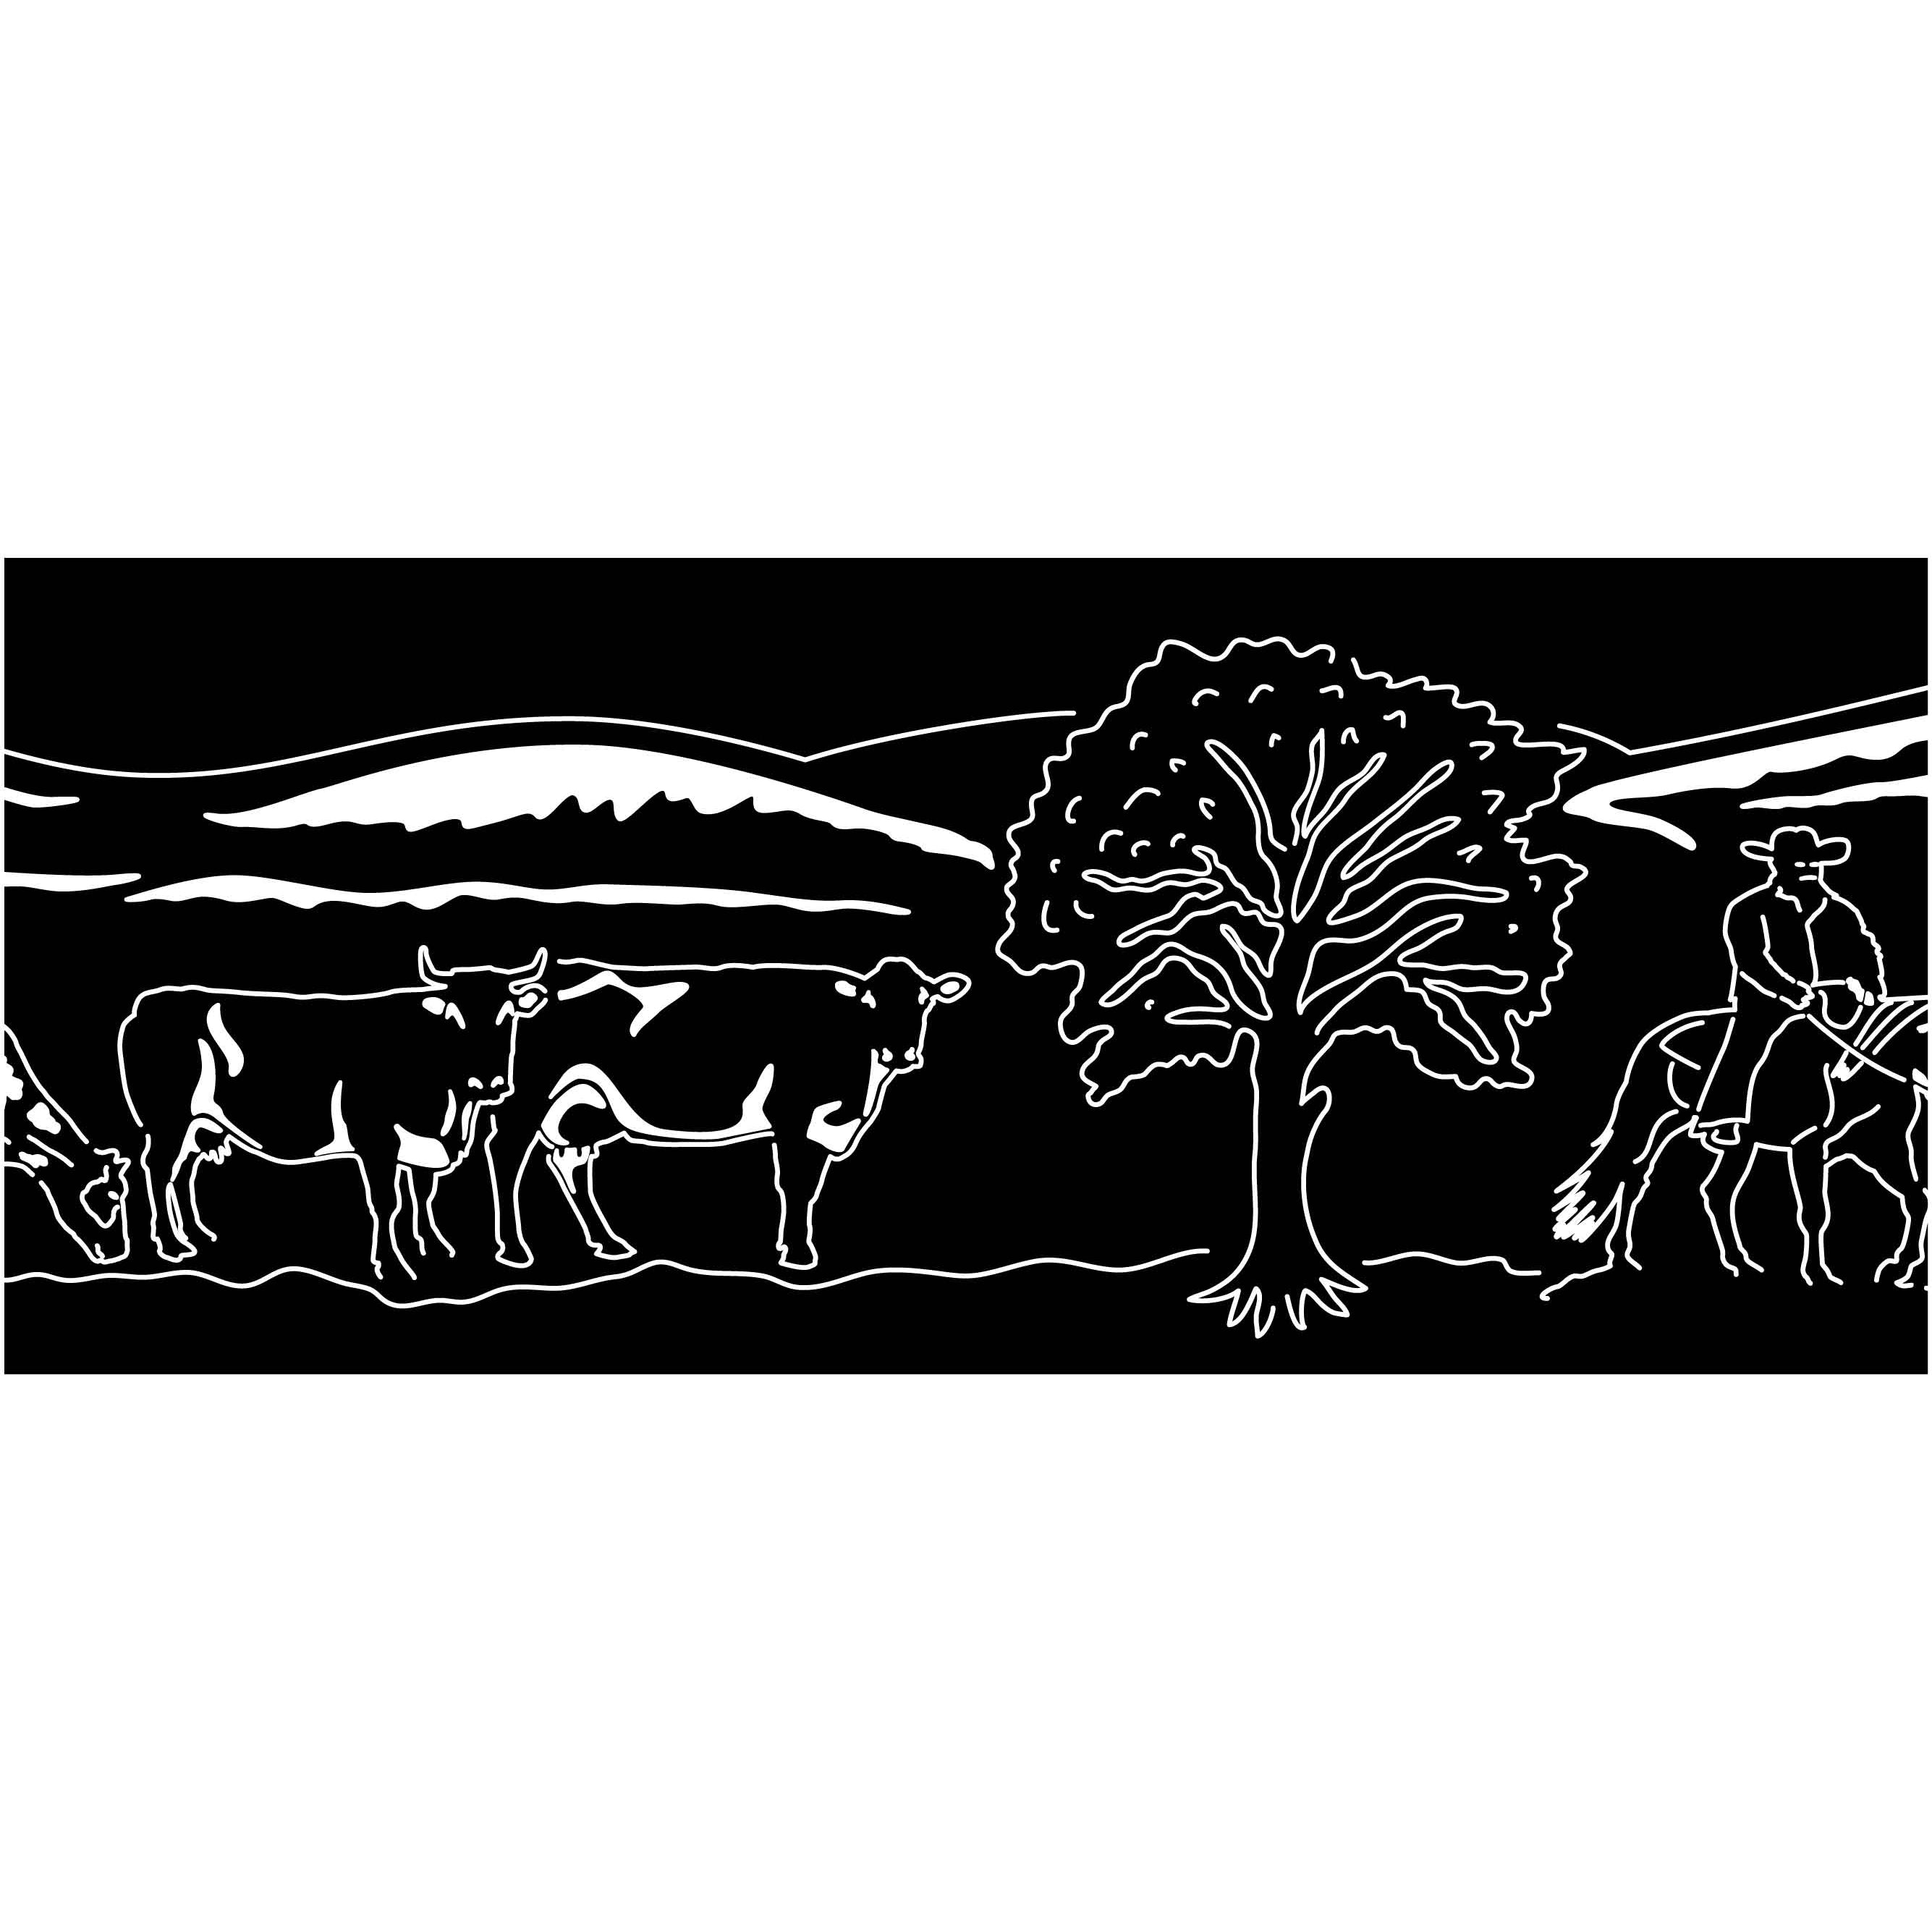 Fire pit Cowboy, Windmill, Hills, Cows, and poplar trees Scene-dxf files